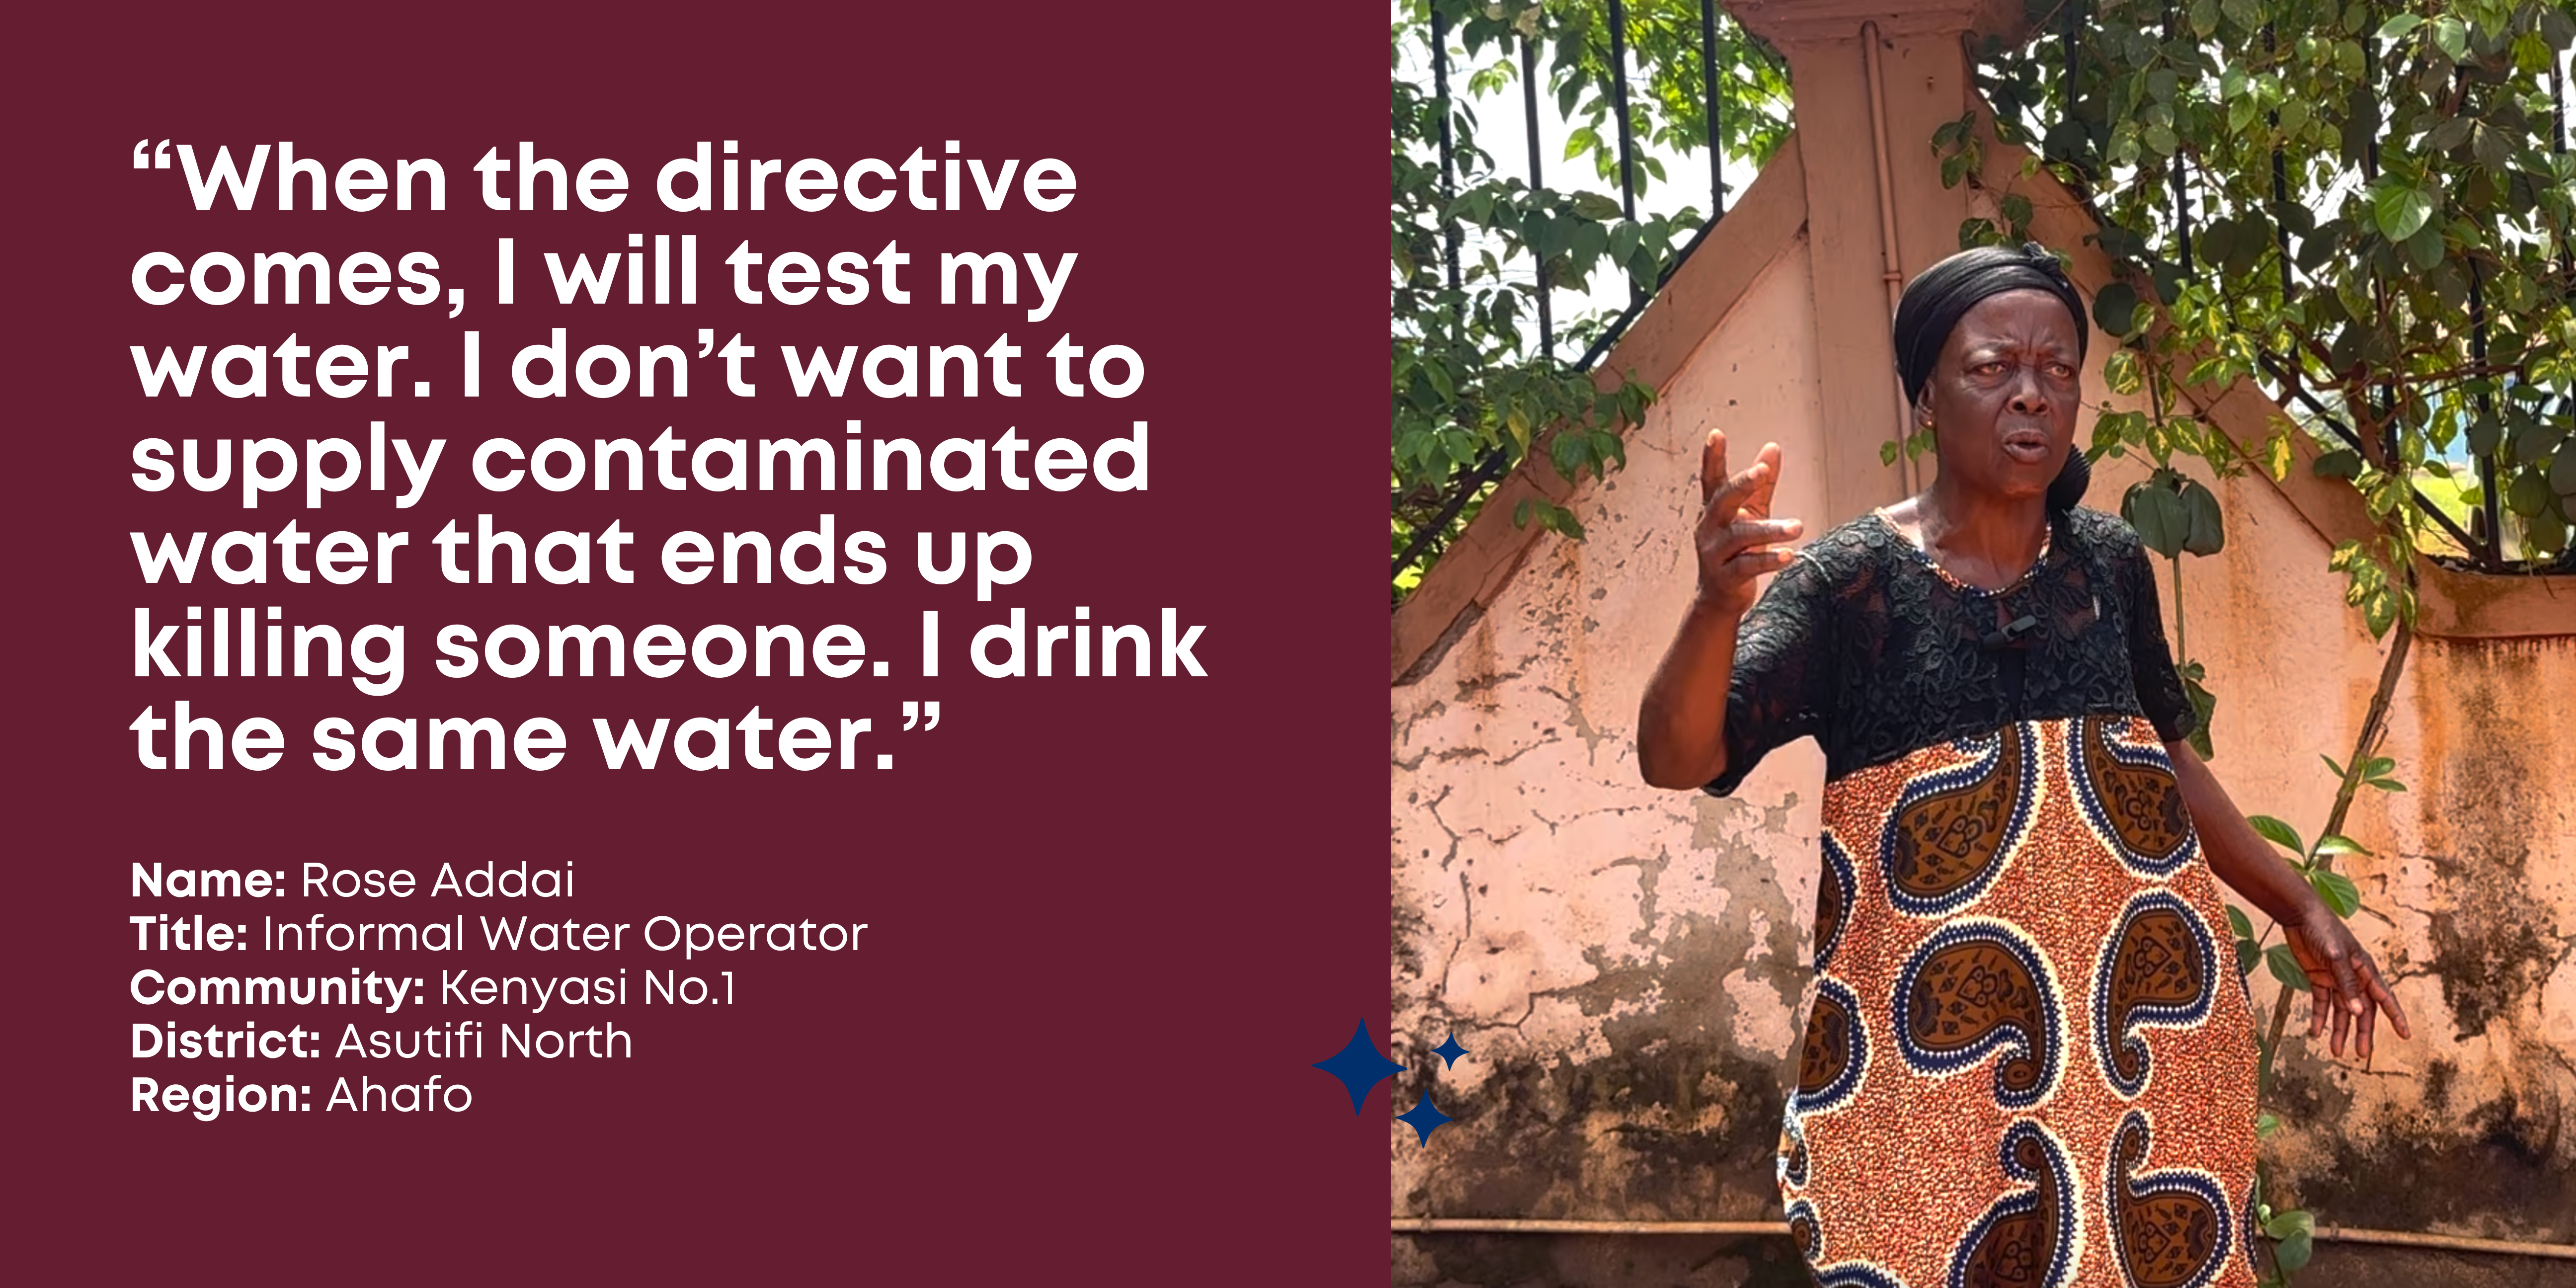 Informal water operator, Rose Addai, speaks with one hand raised, wearing traditional dress in orange and black hues: "When the directive comes, I will test my water. I don't want to supply contaminated water that ends up killing someone. I drink the same water." Asutifi North, Ahafo, Ghana